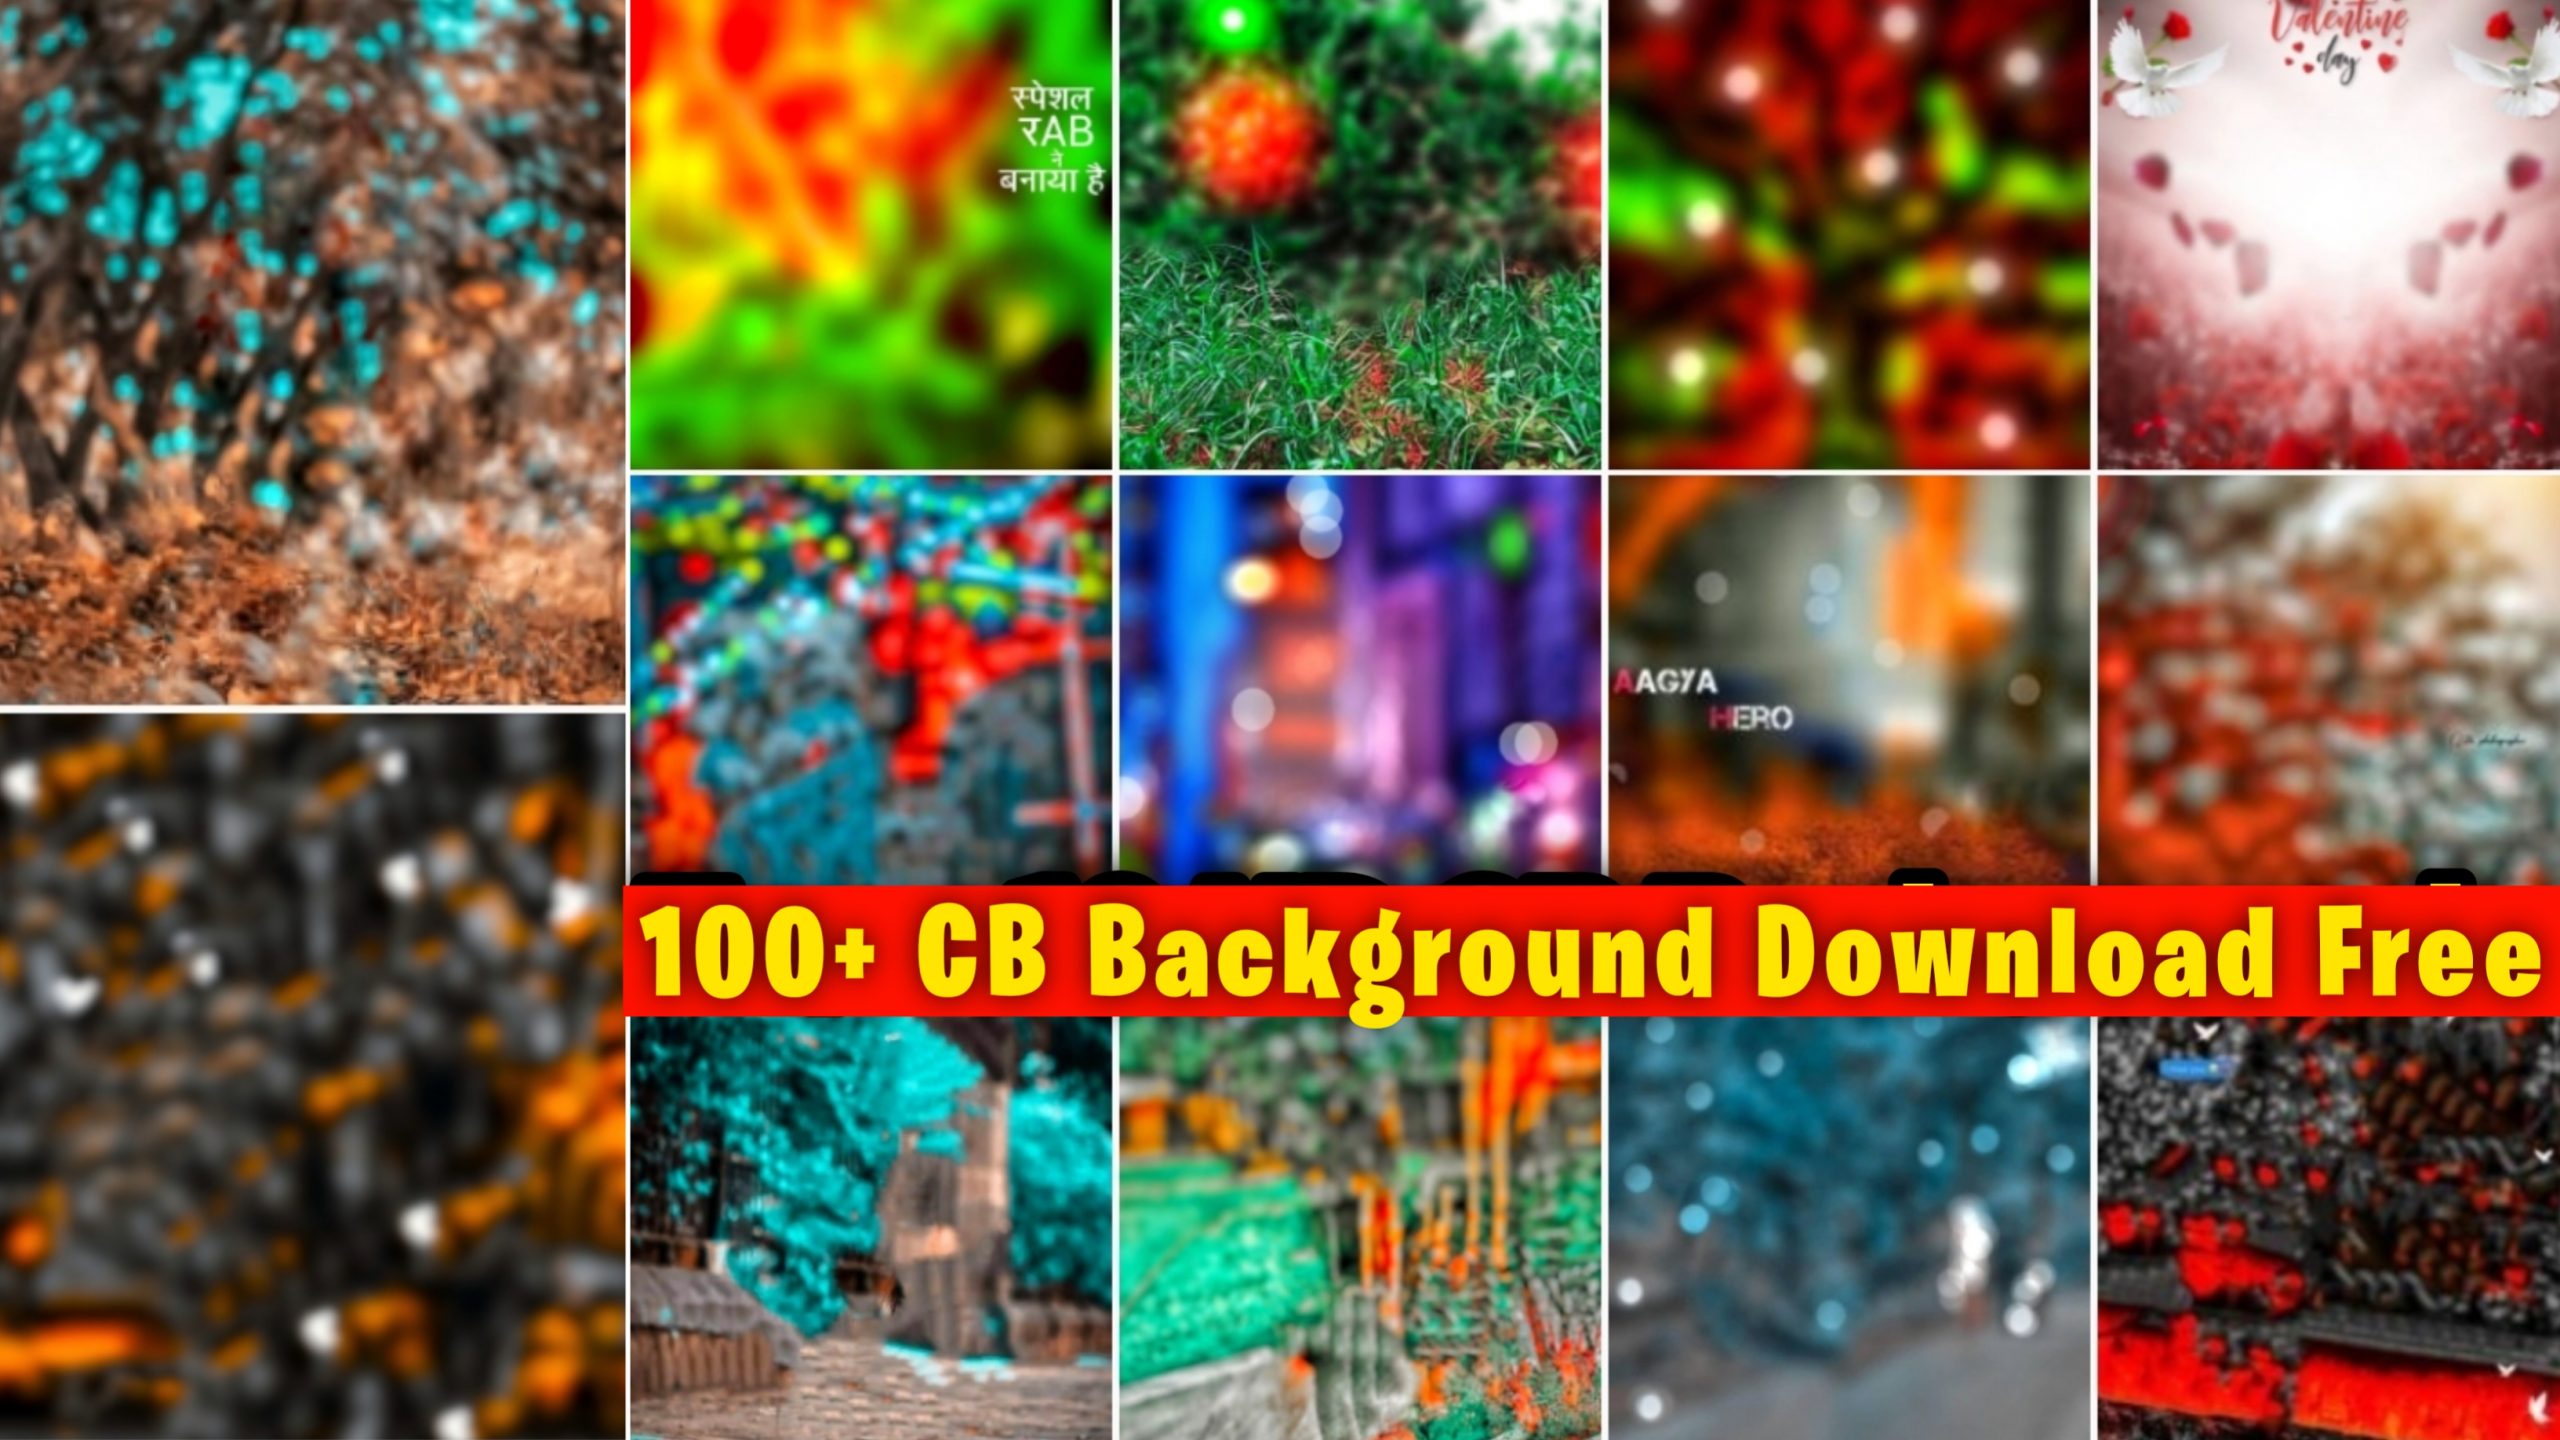 CB Background Full HD For 2019 Download For Free Backgrounds  Badshah  Editing Zone  Picsart background Desktop background pictures Dslr  background images